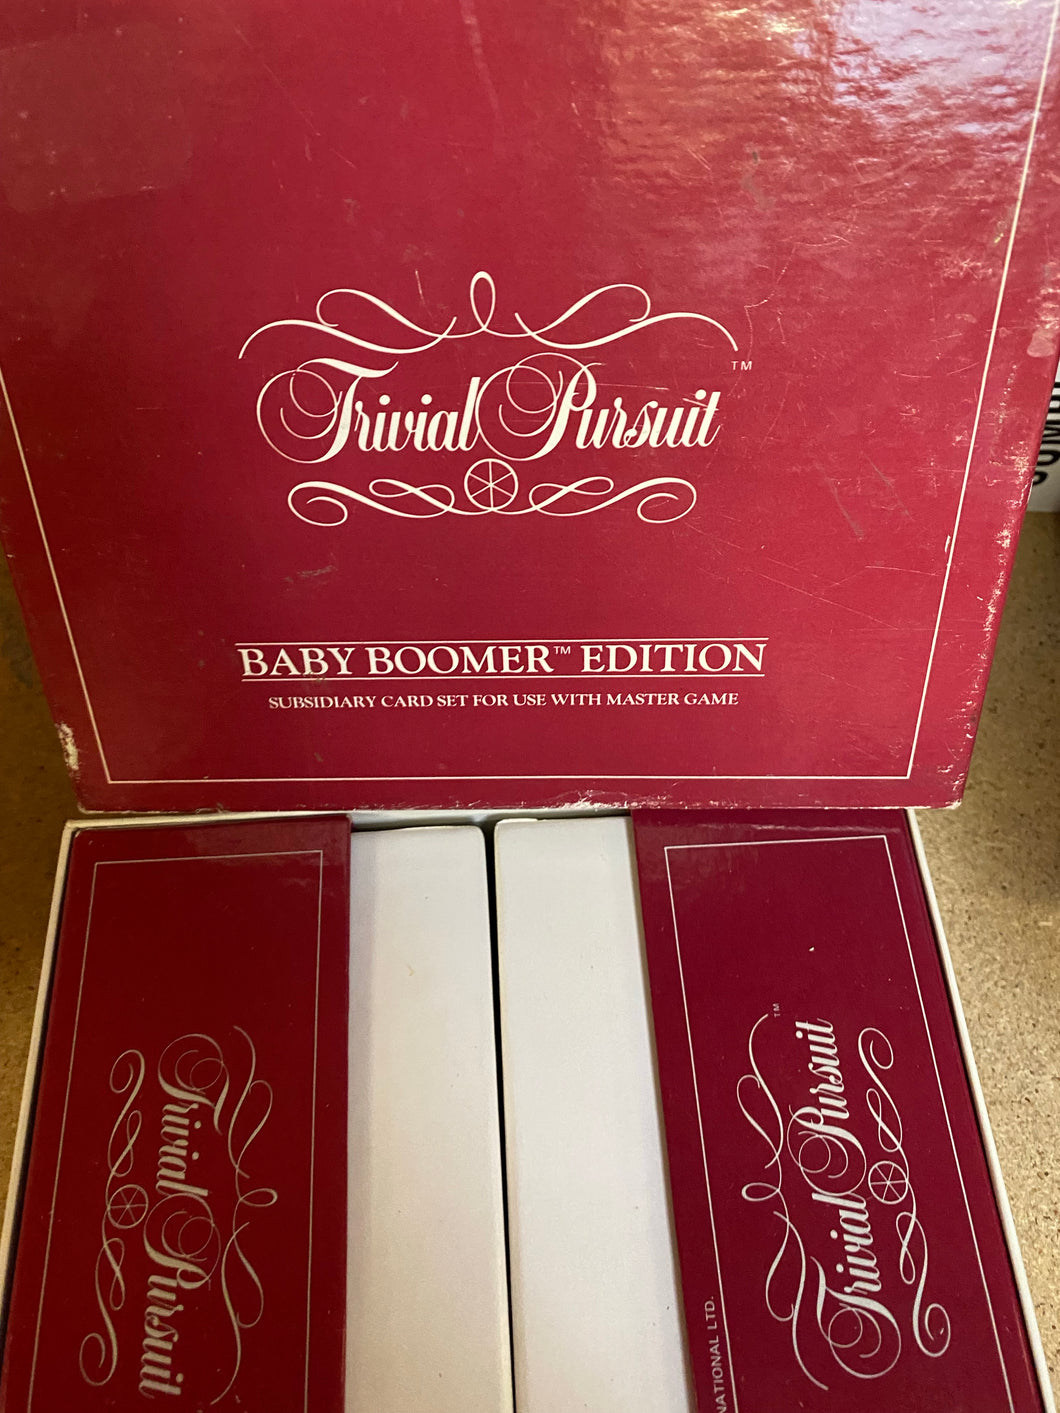 Trivial PURSUIT Baby Boomer Edition subsidiary card set